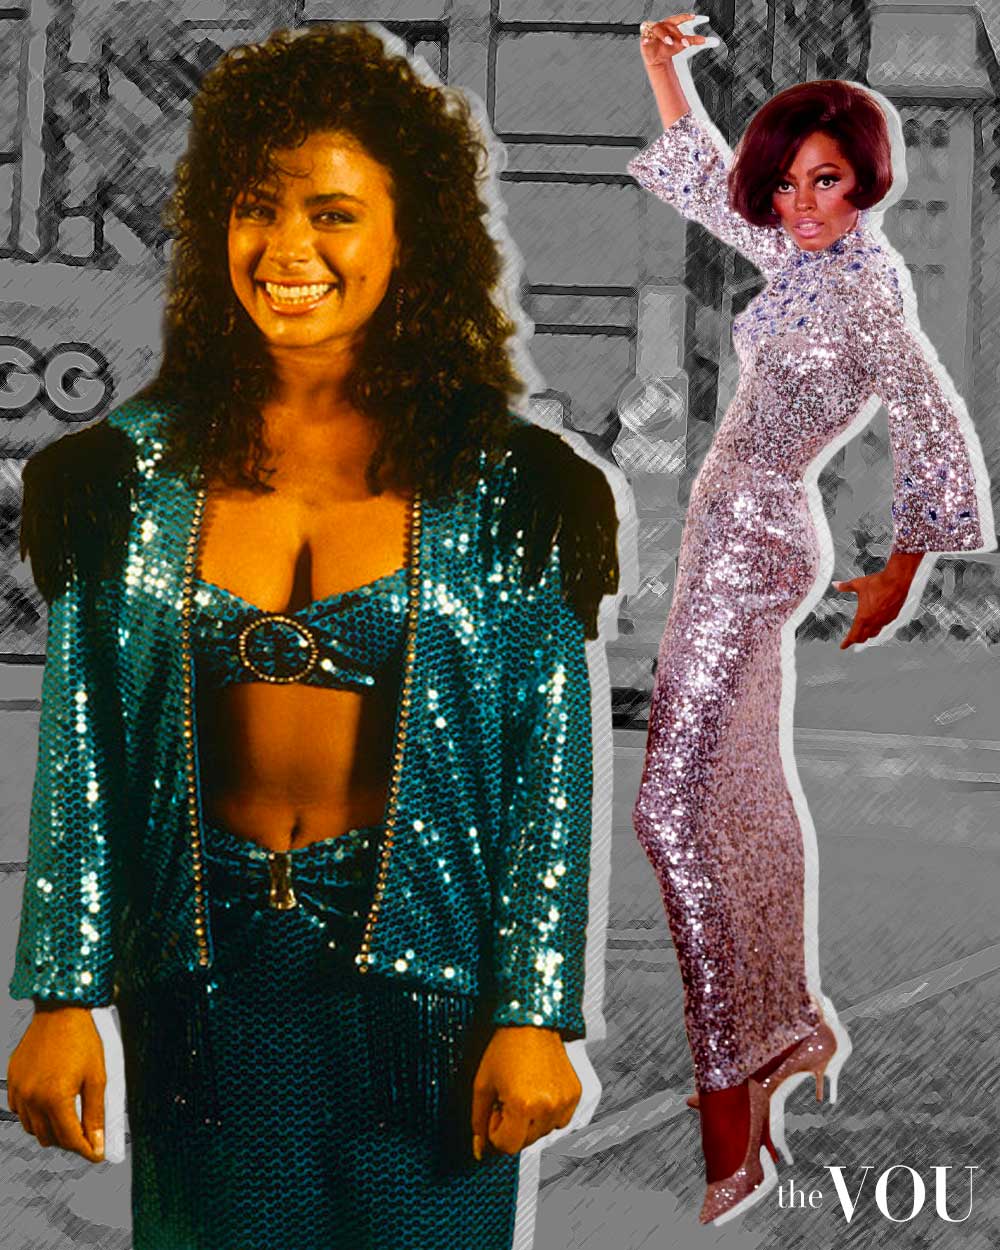 Diana Ross and Paula Abdul wearing sequins in 80s fashion 